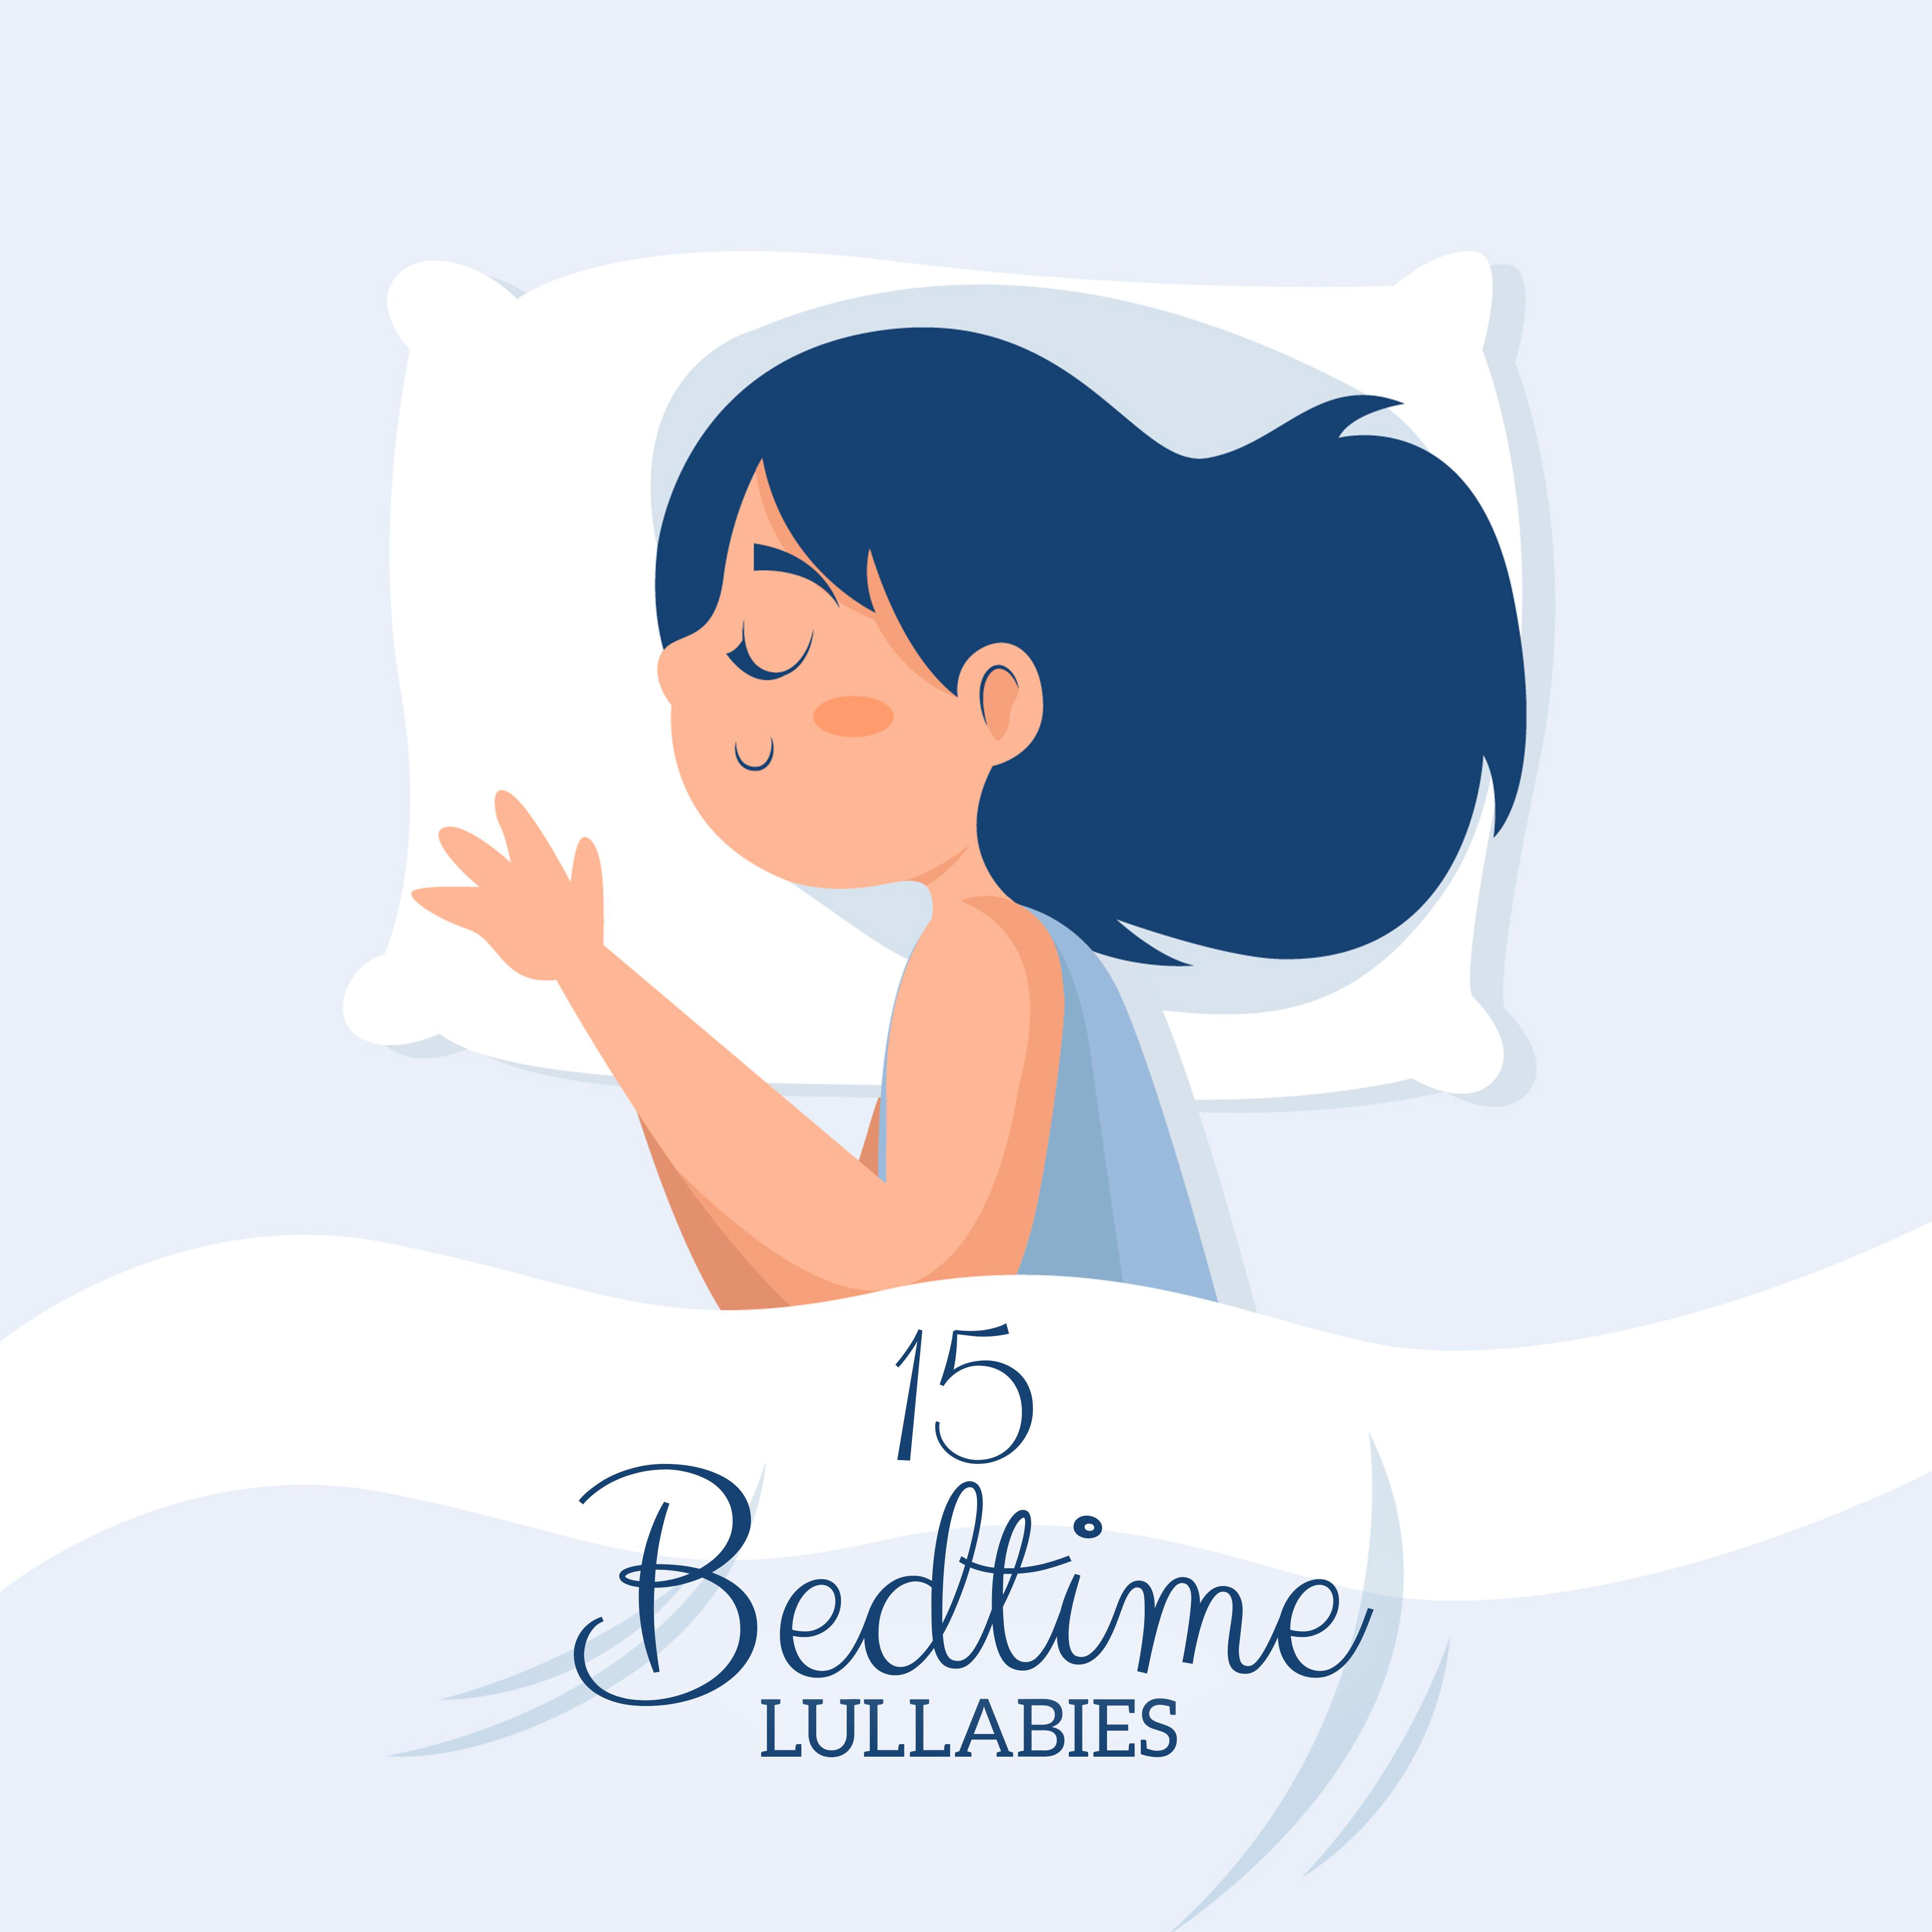 15 Bedtime Lullabies: New Age Soft 2019 Music for Total Rest & Relax, Long Sleep & Beautiful Dreams